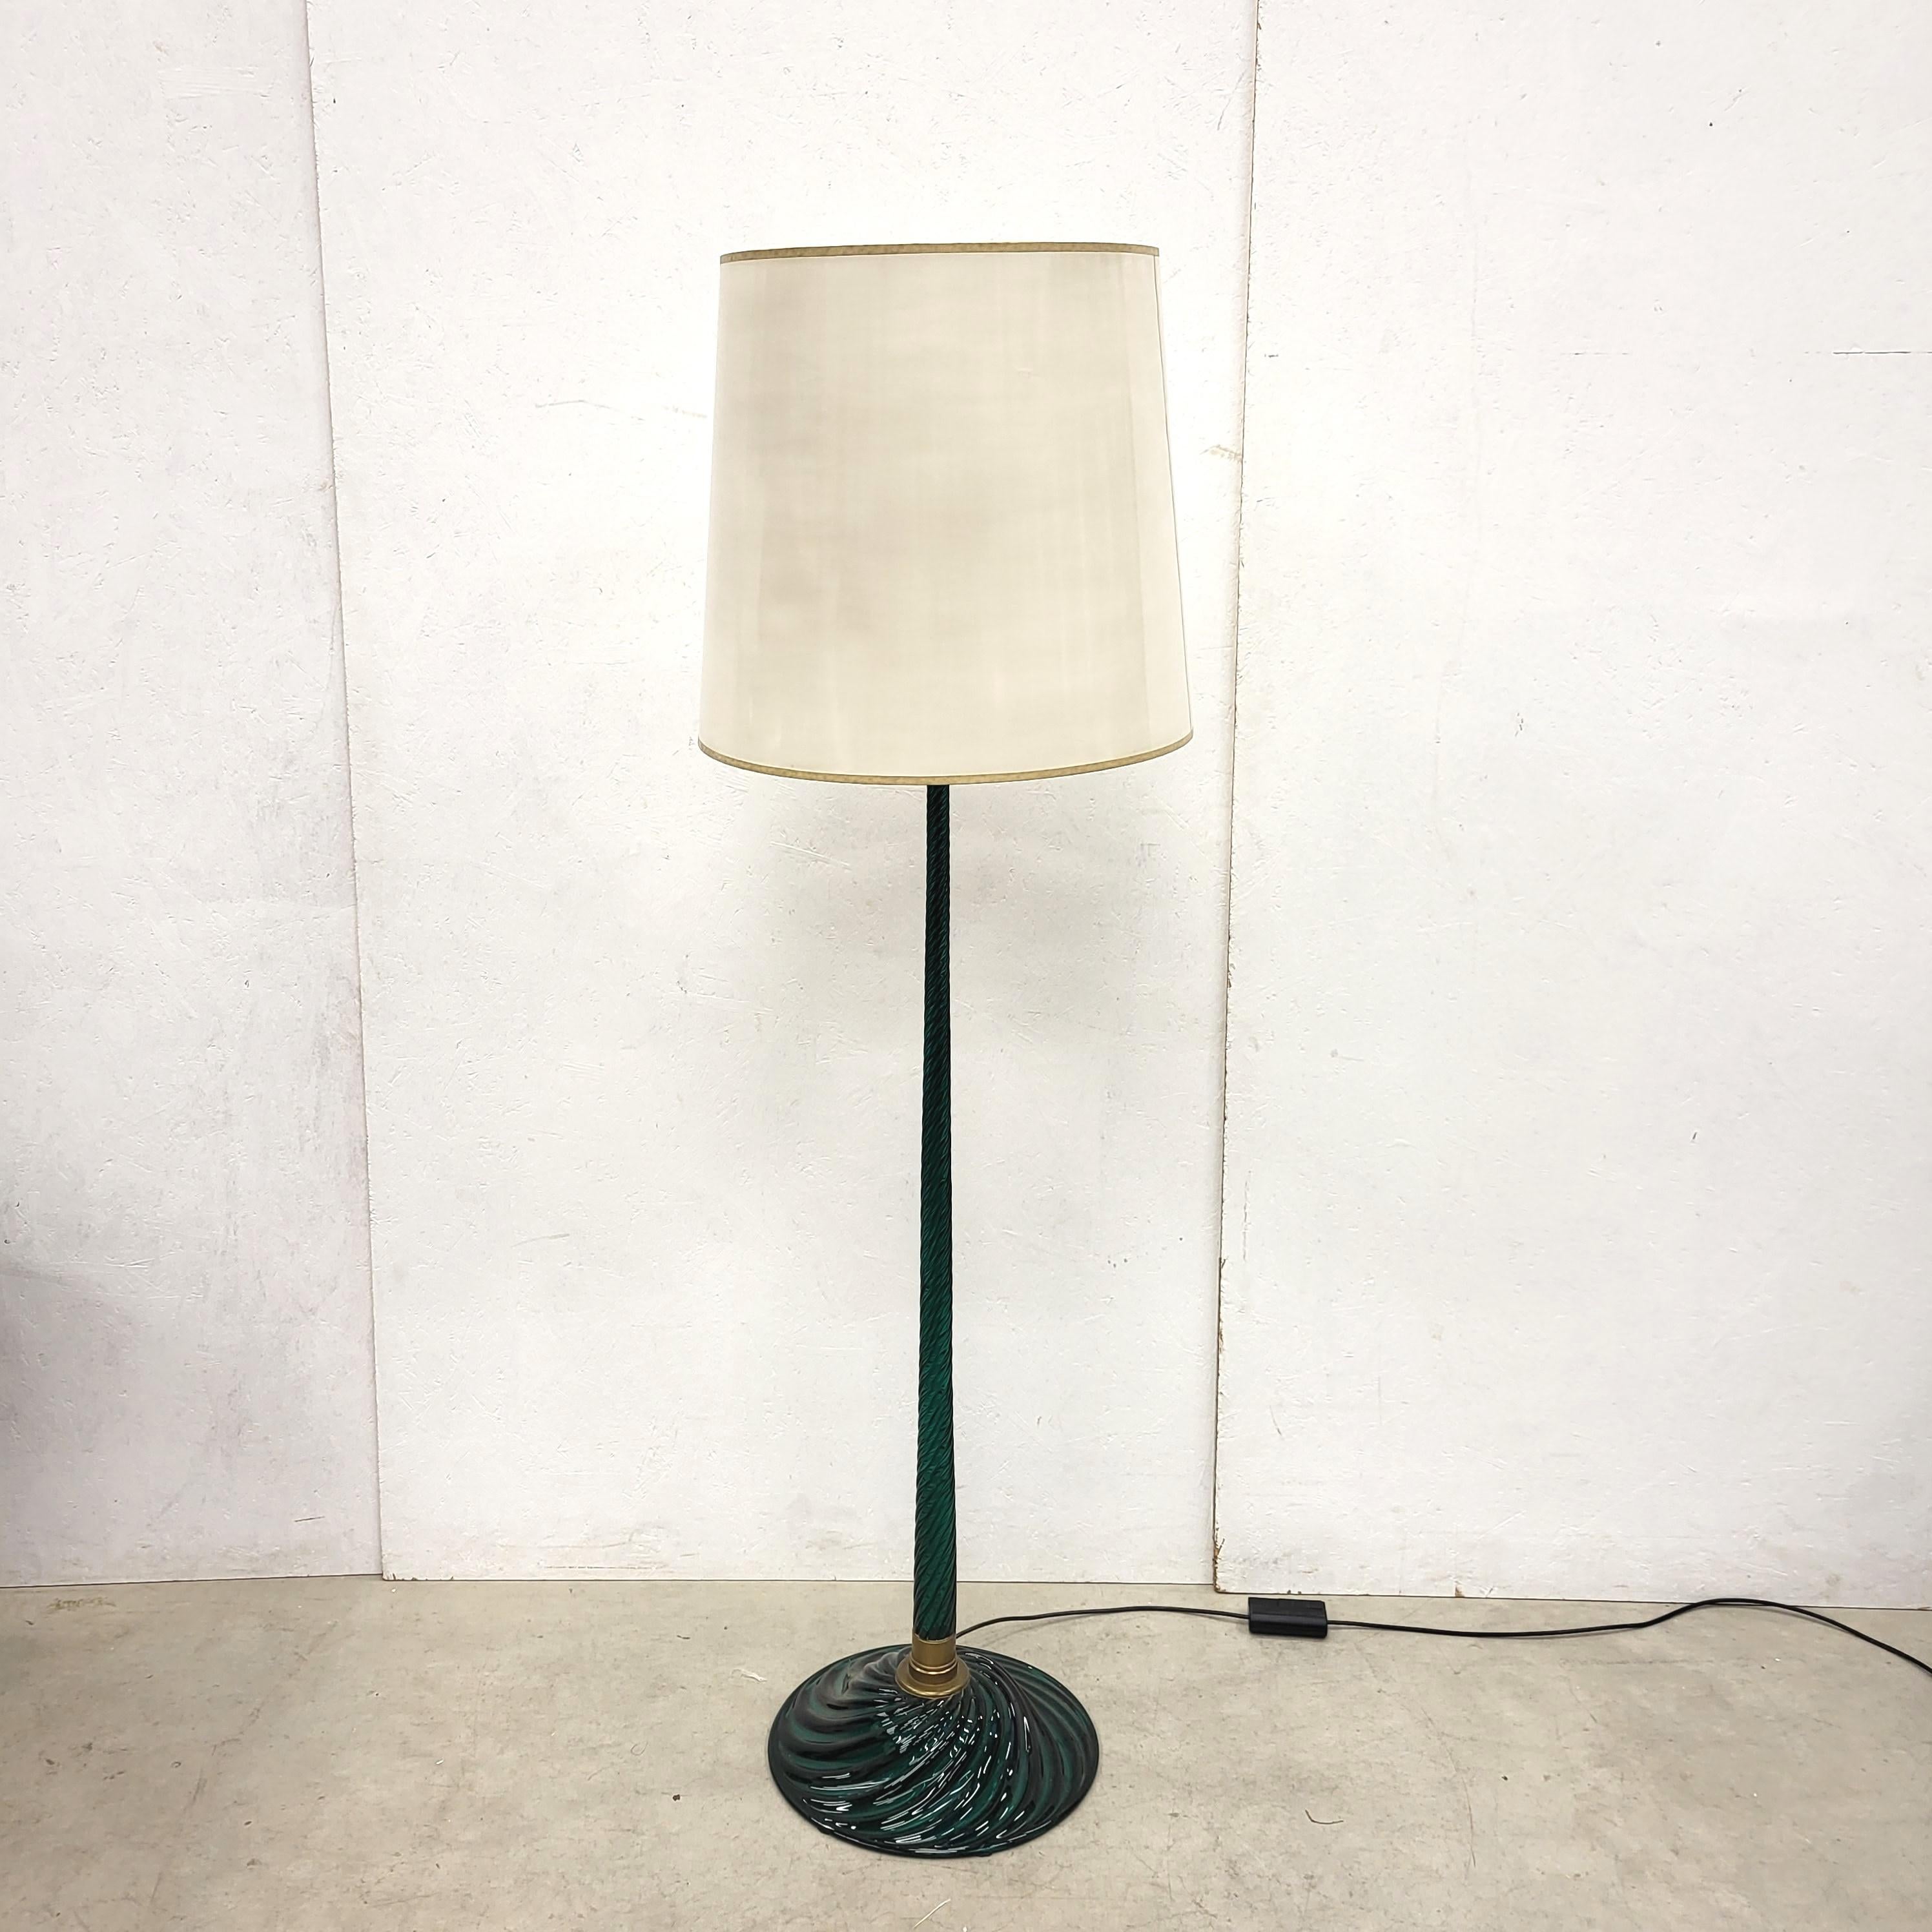 Rare floor lamp by Carlo Scarpa for Venini, Italy in the 1940s.

Very fine piece which was made overall from finest Murano-Glass.
Stunning Aquamarine green-blue colour.

The lamp is in a very good condition!.
 